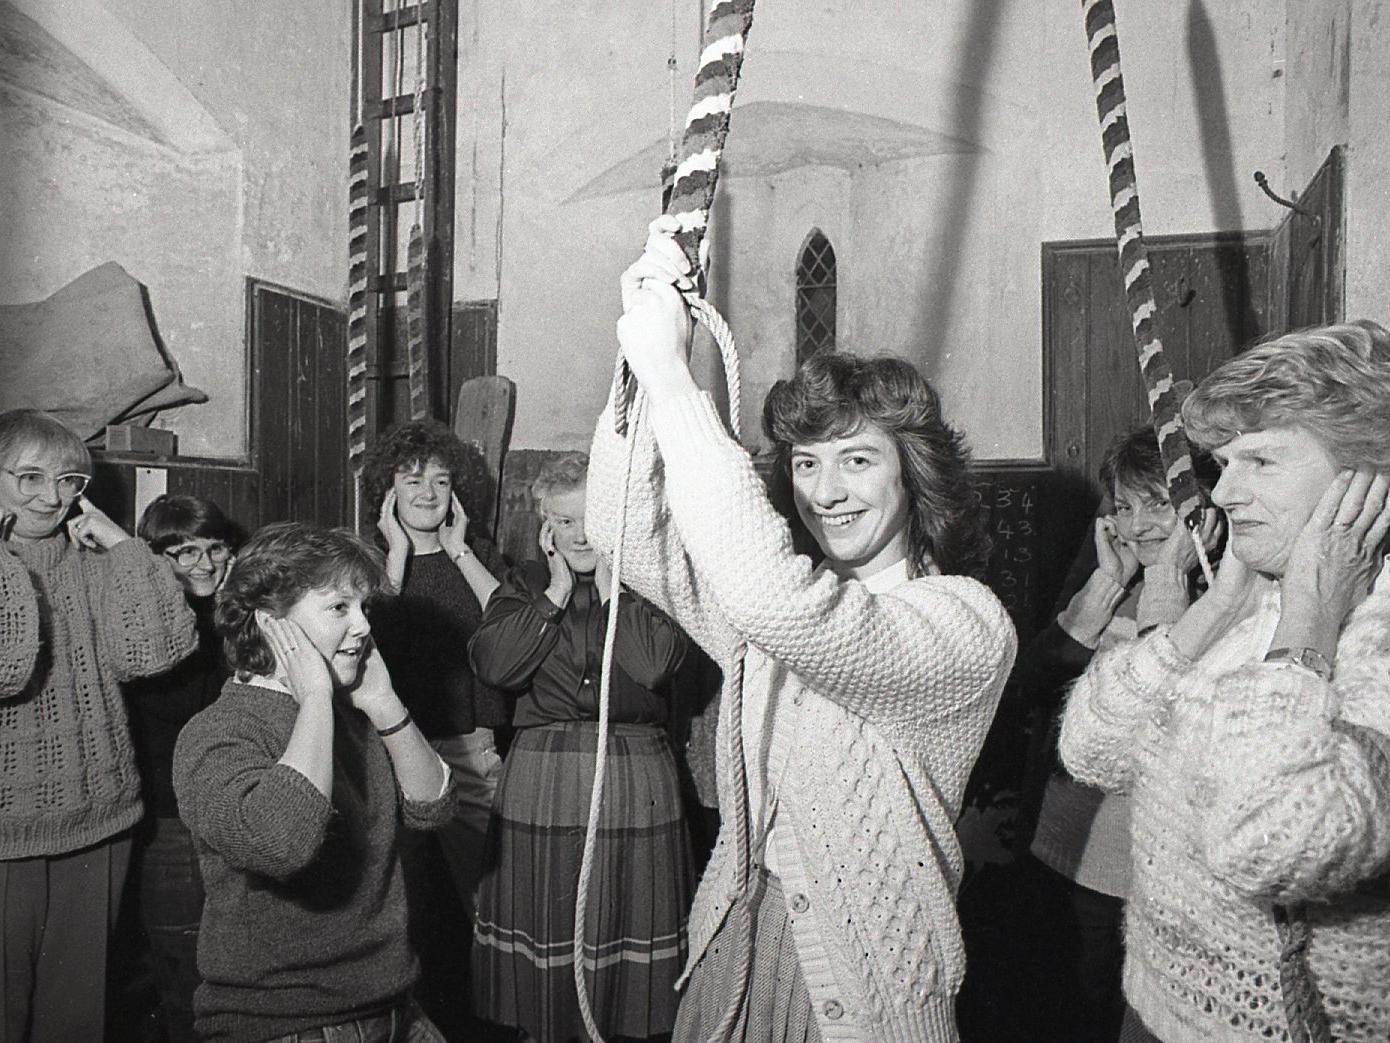 Post reporter Gill Brindle (centre) joined the female bell-ringers of St John's Church in Lytham. For at this church the bell-ringers are all strictly ladies - that's the rule